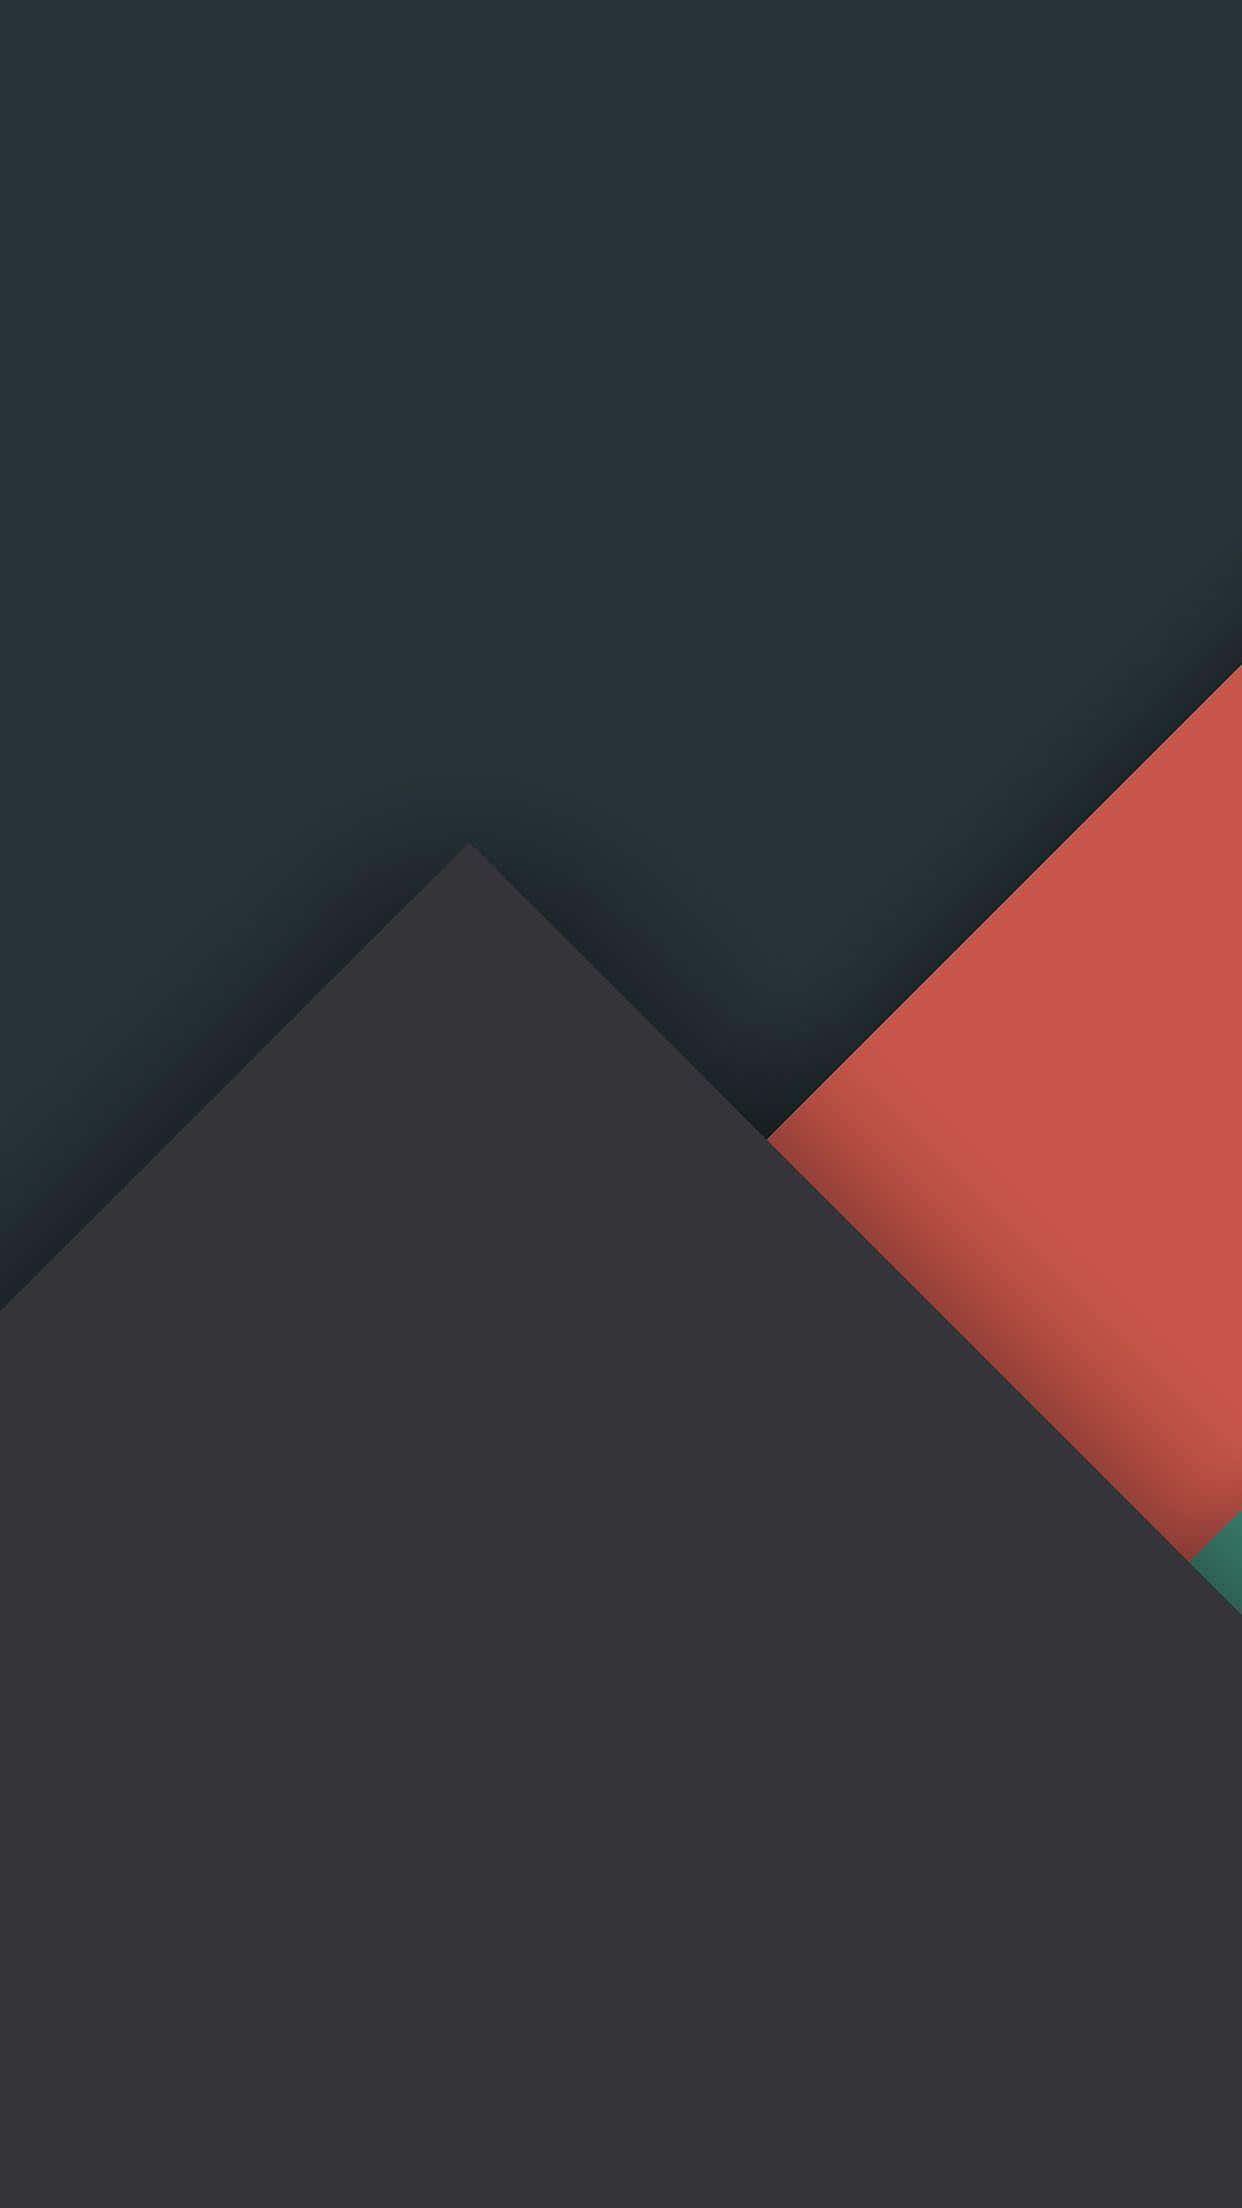 A Colorful Background With A Black And Red Triangle